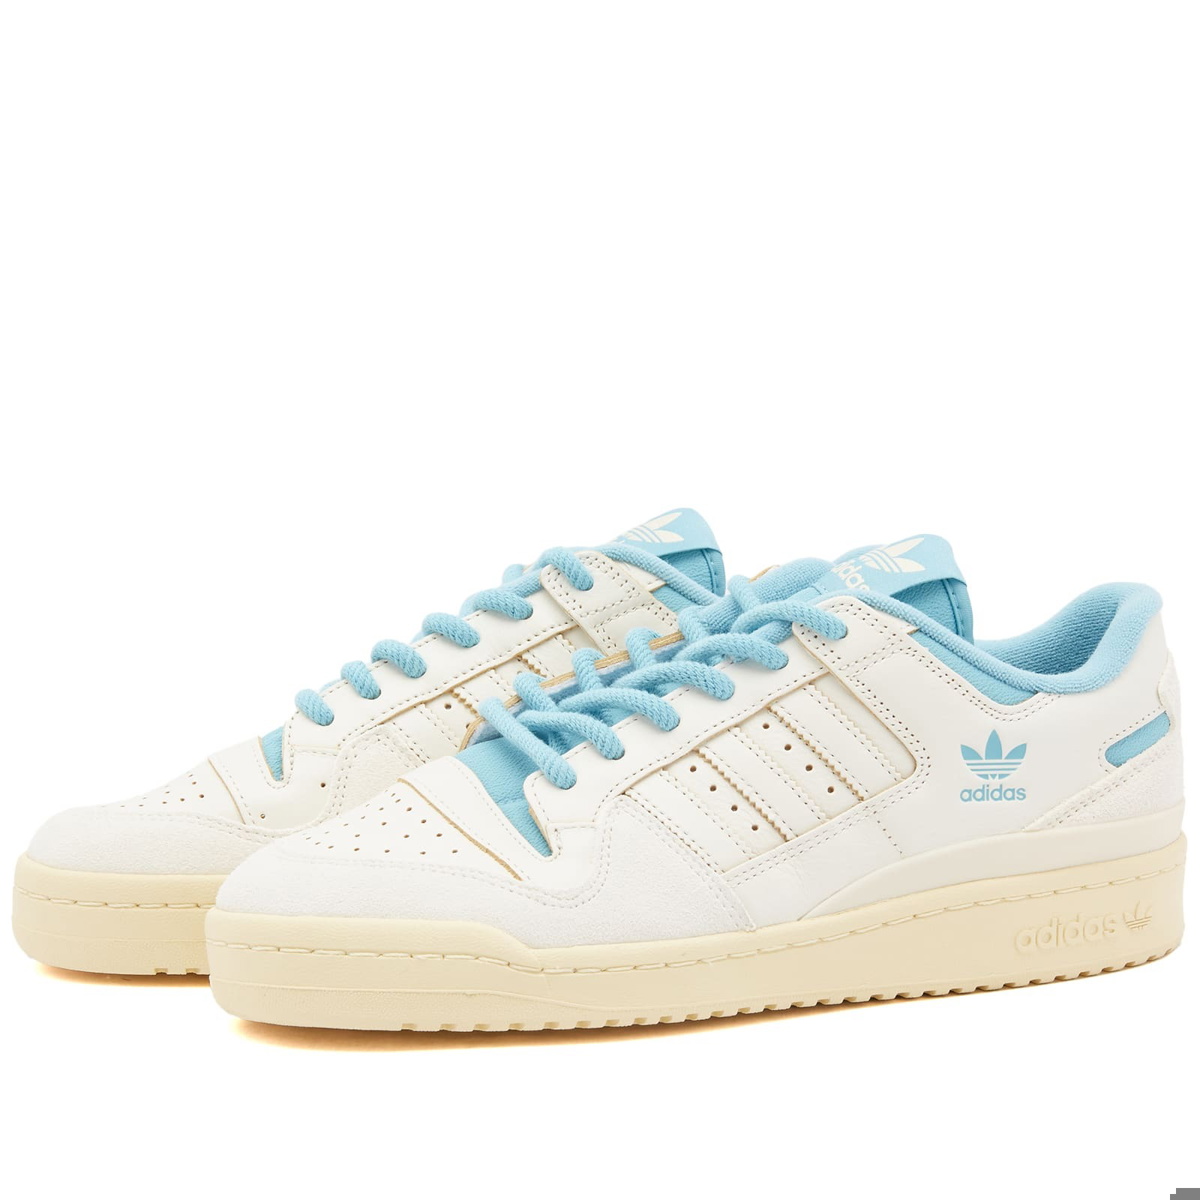 Adidas Men's Forum 84 Low CL Sneakers in Off White/Cream White adidas